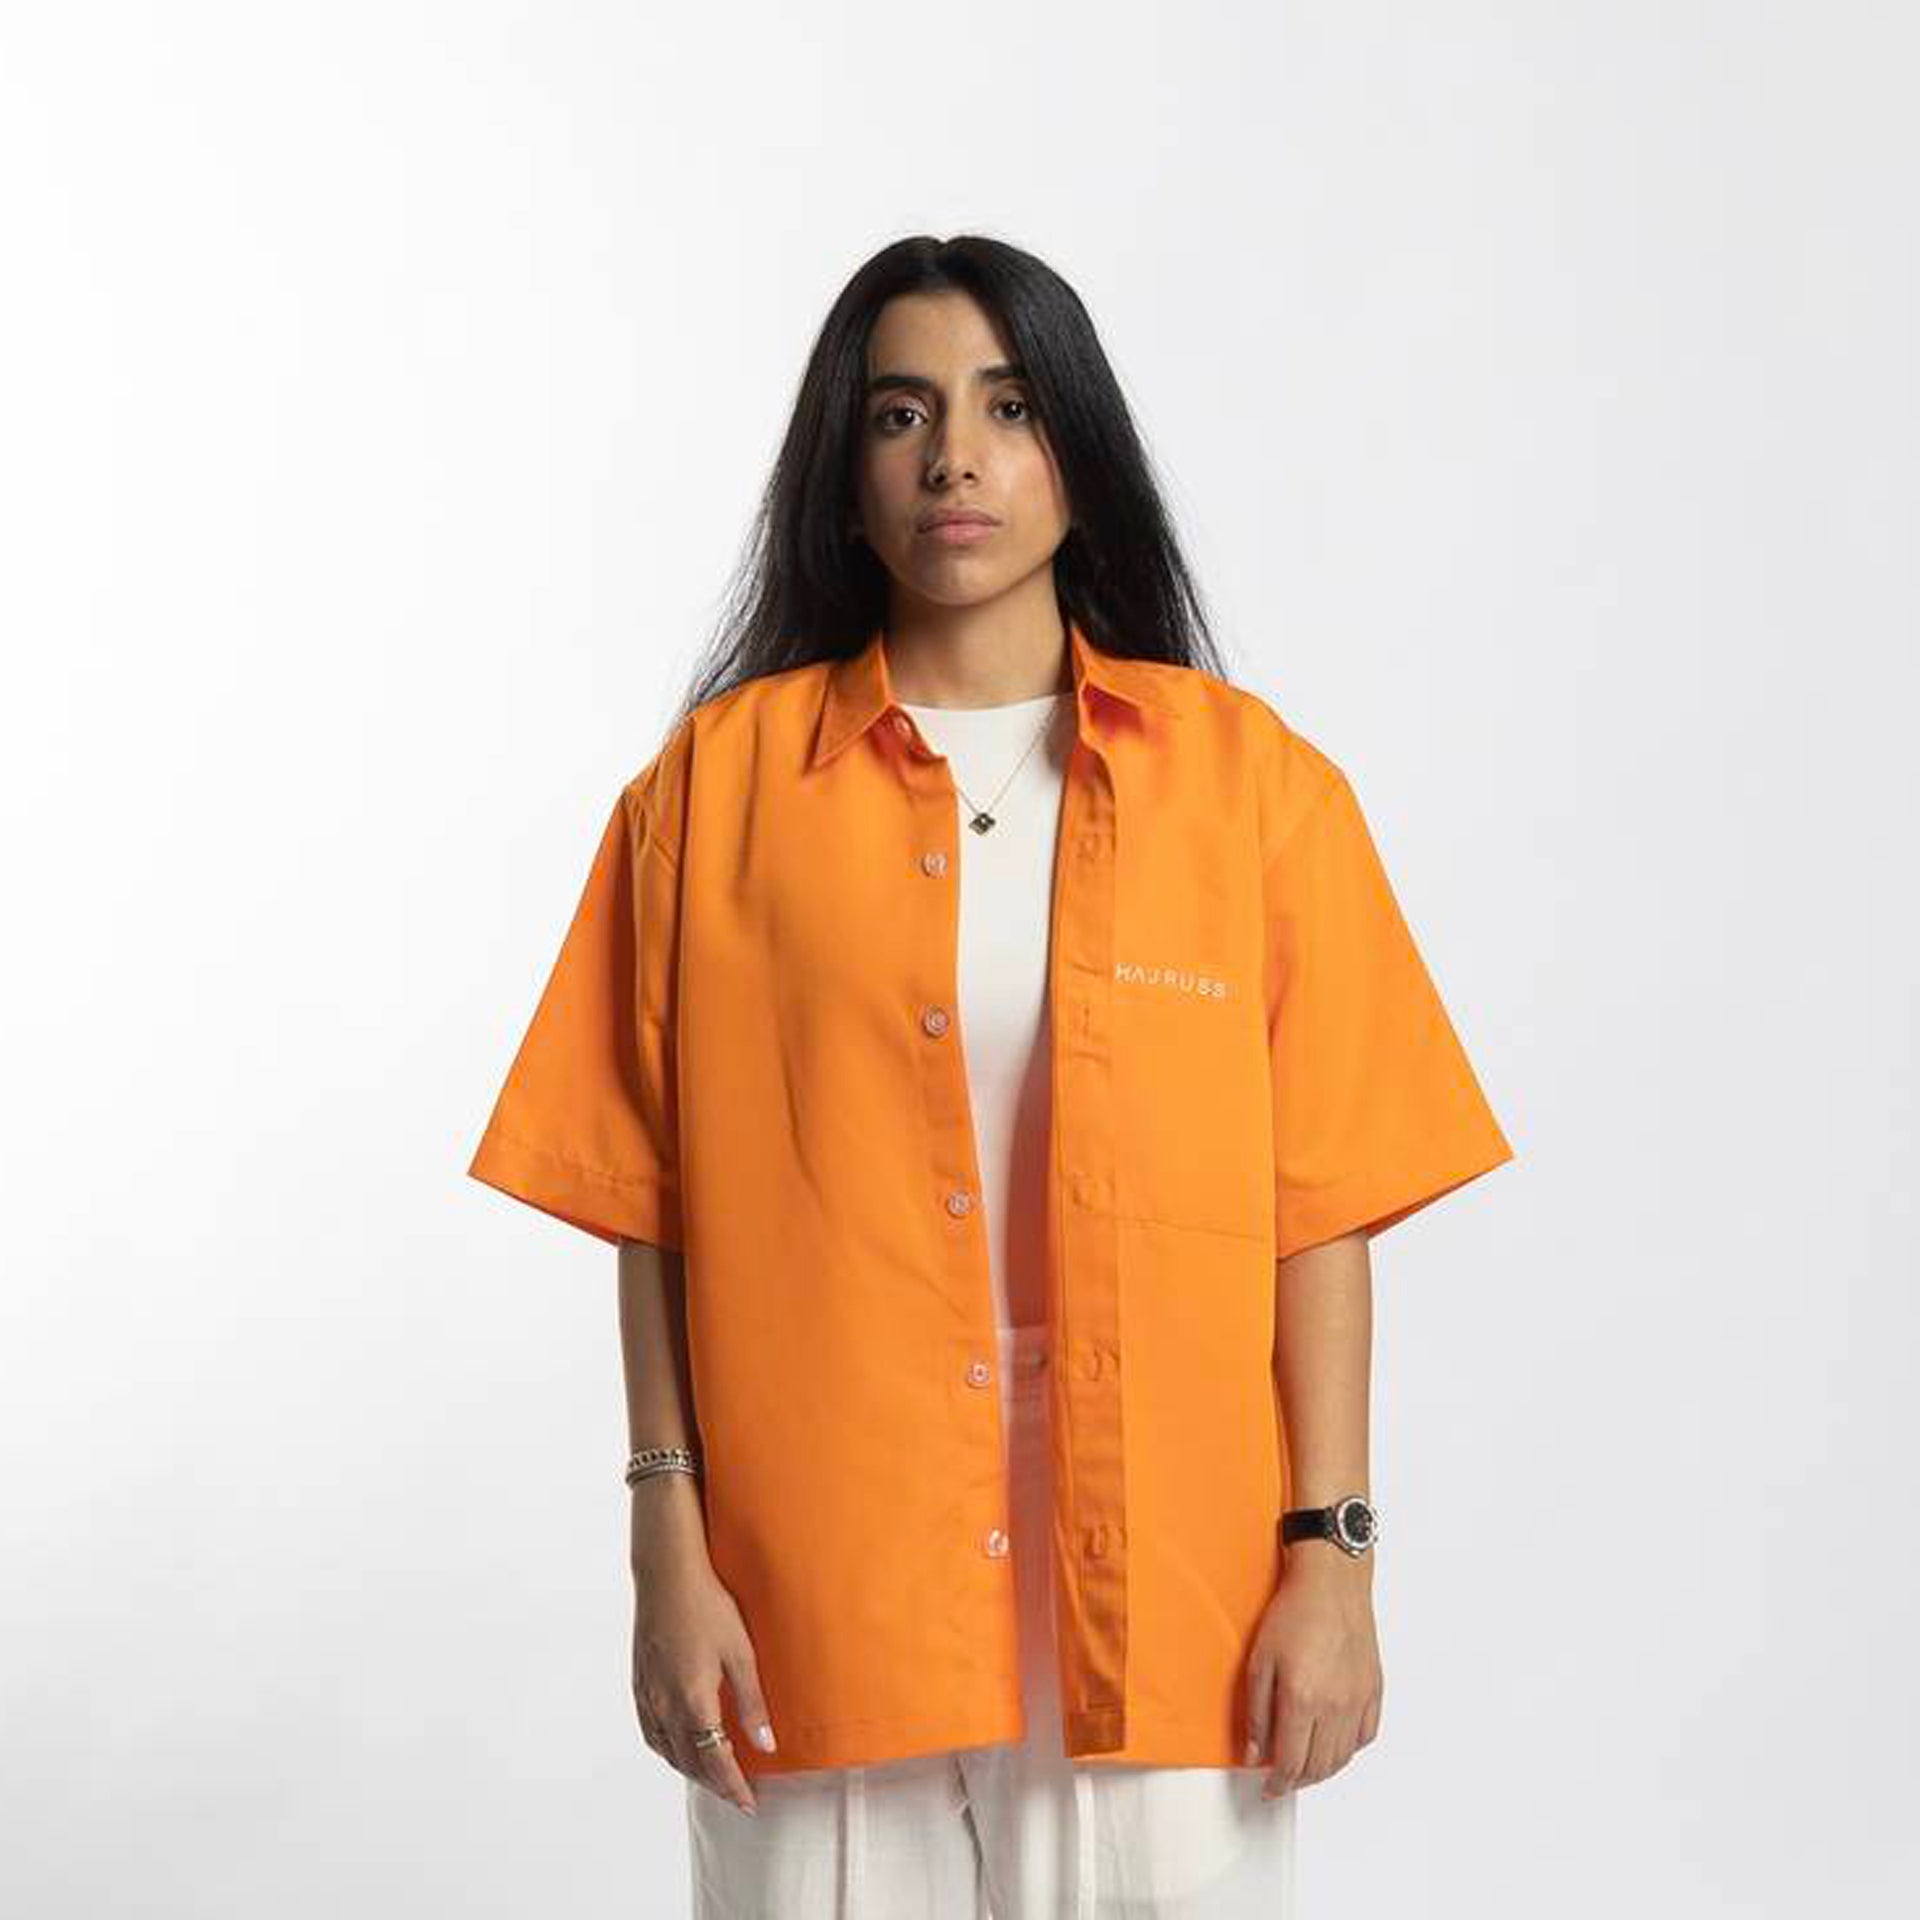 Orange Short-Sleeve Shirt With 'Sun Use Only' Typography on the Back From Hajruss